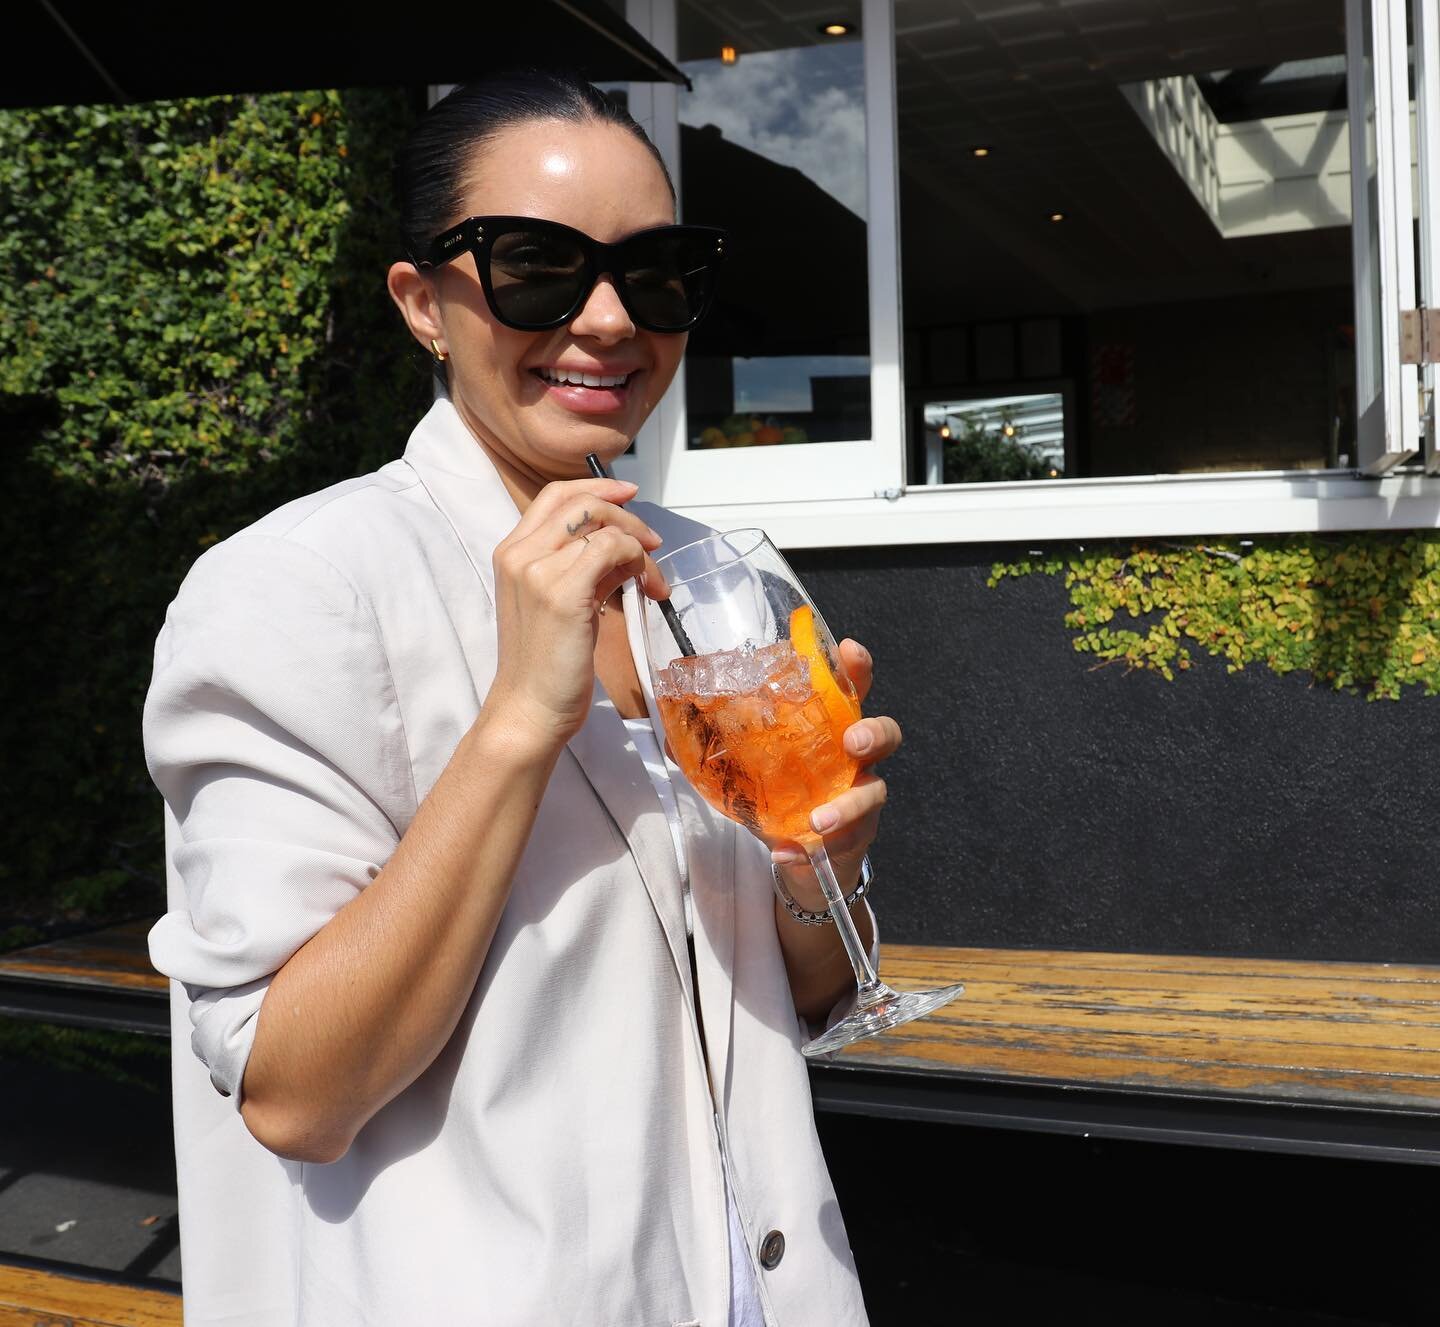 Come soak up the last of the summer rays! Our outdoor tables are sun-drenched till late - add an  @aperolspritznz or two for the summer injection we all need right about now ☀️🍊